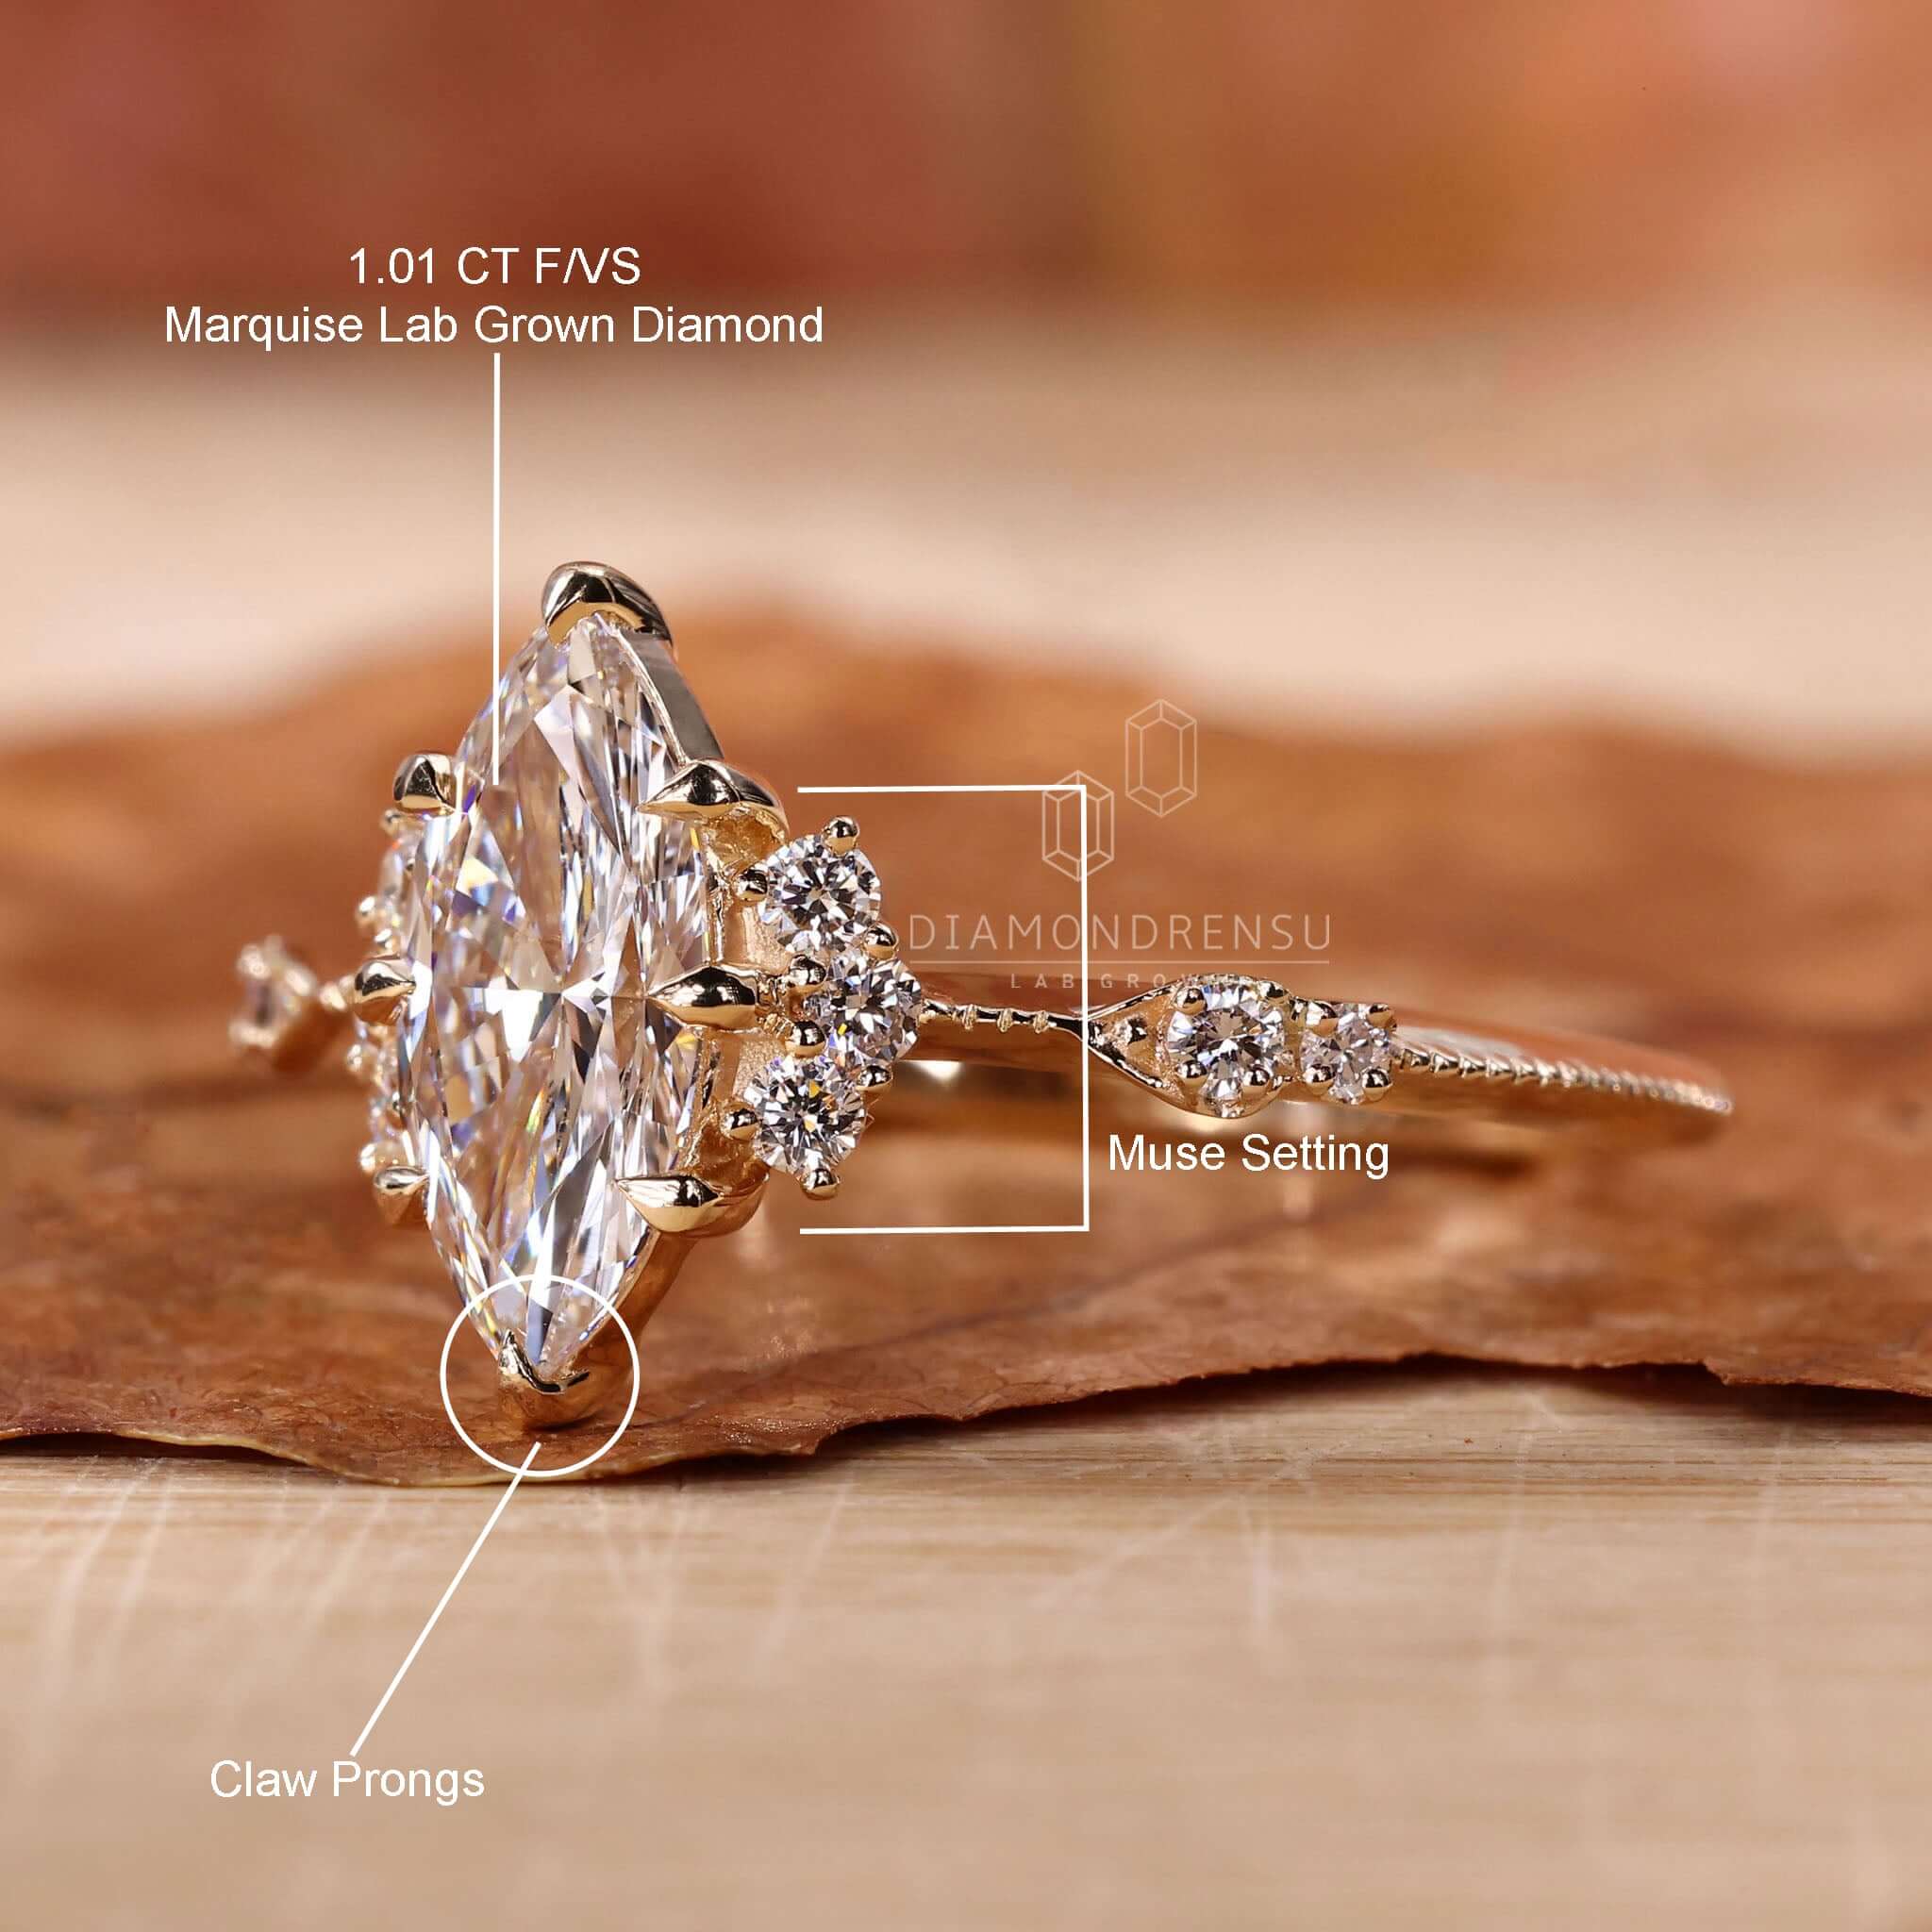 A handcrafted marquise cut diamond engagement ring with vintage charm, featuring round sidestones, knife edge band, and intricate miligrain work.